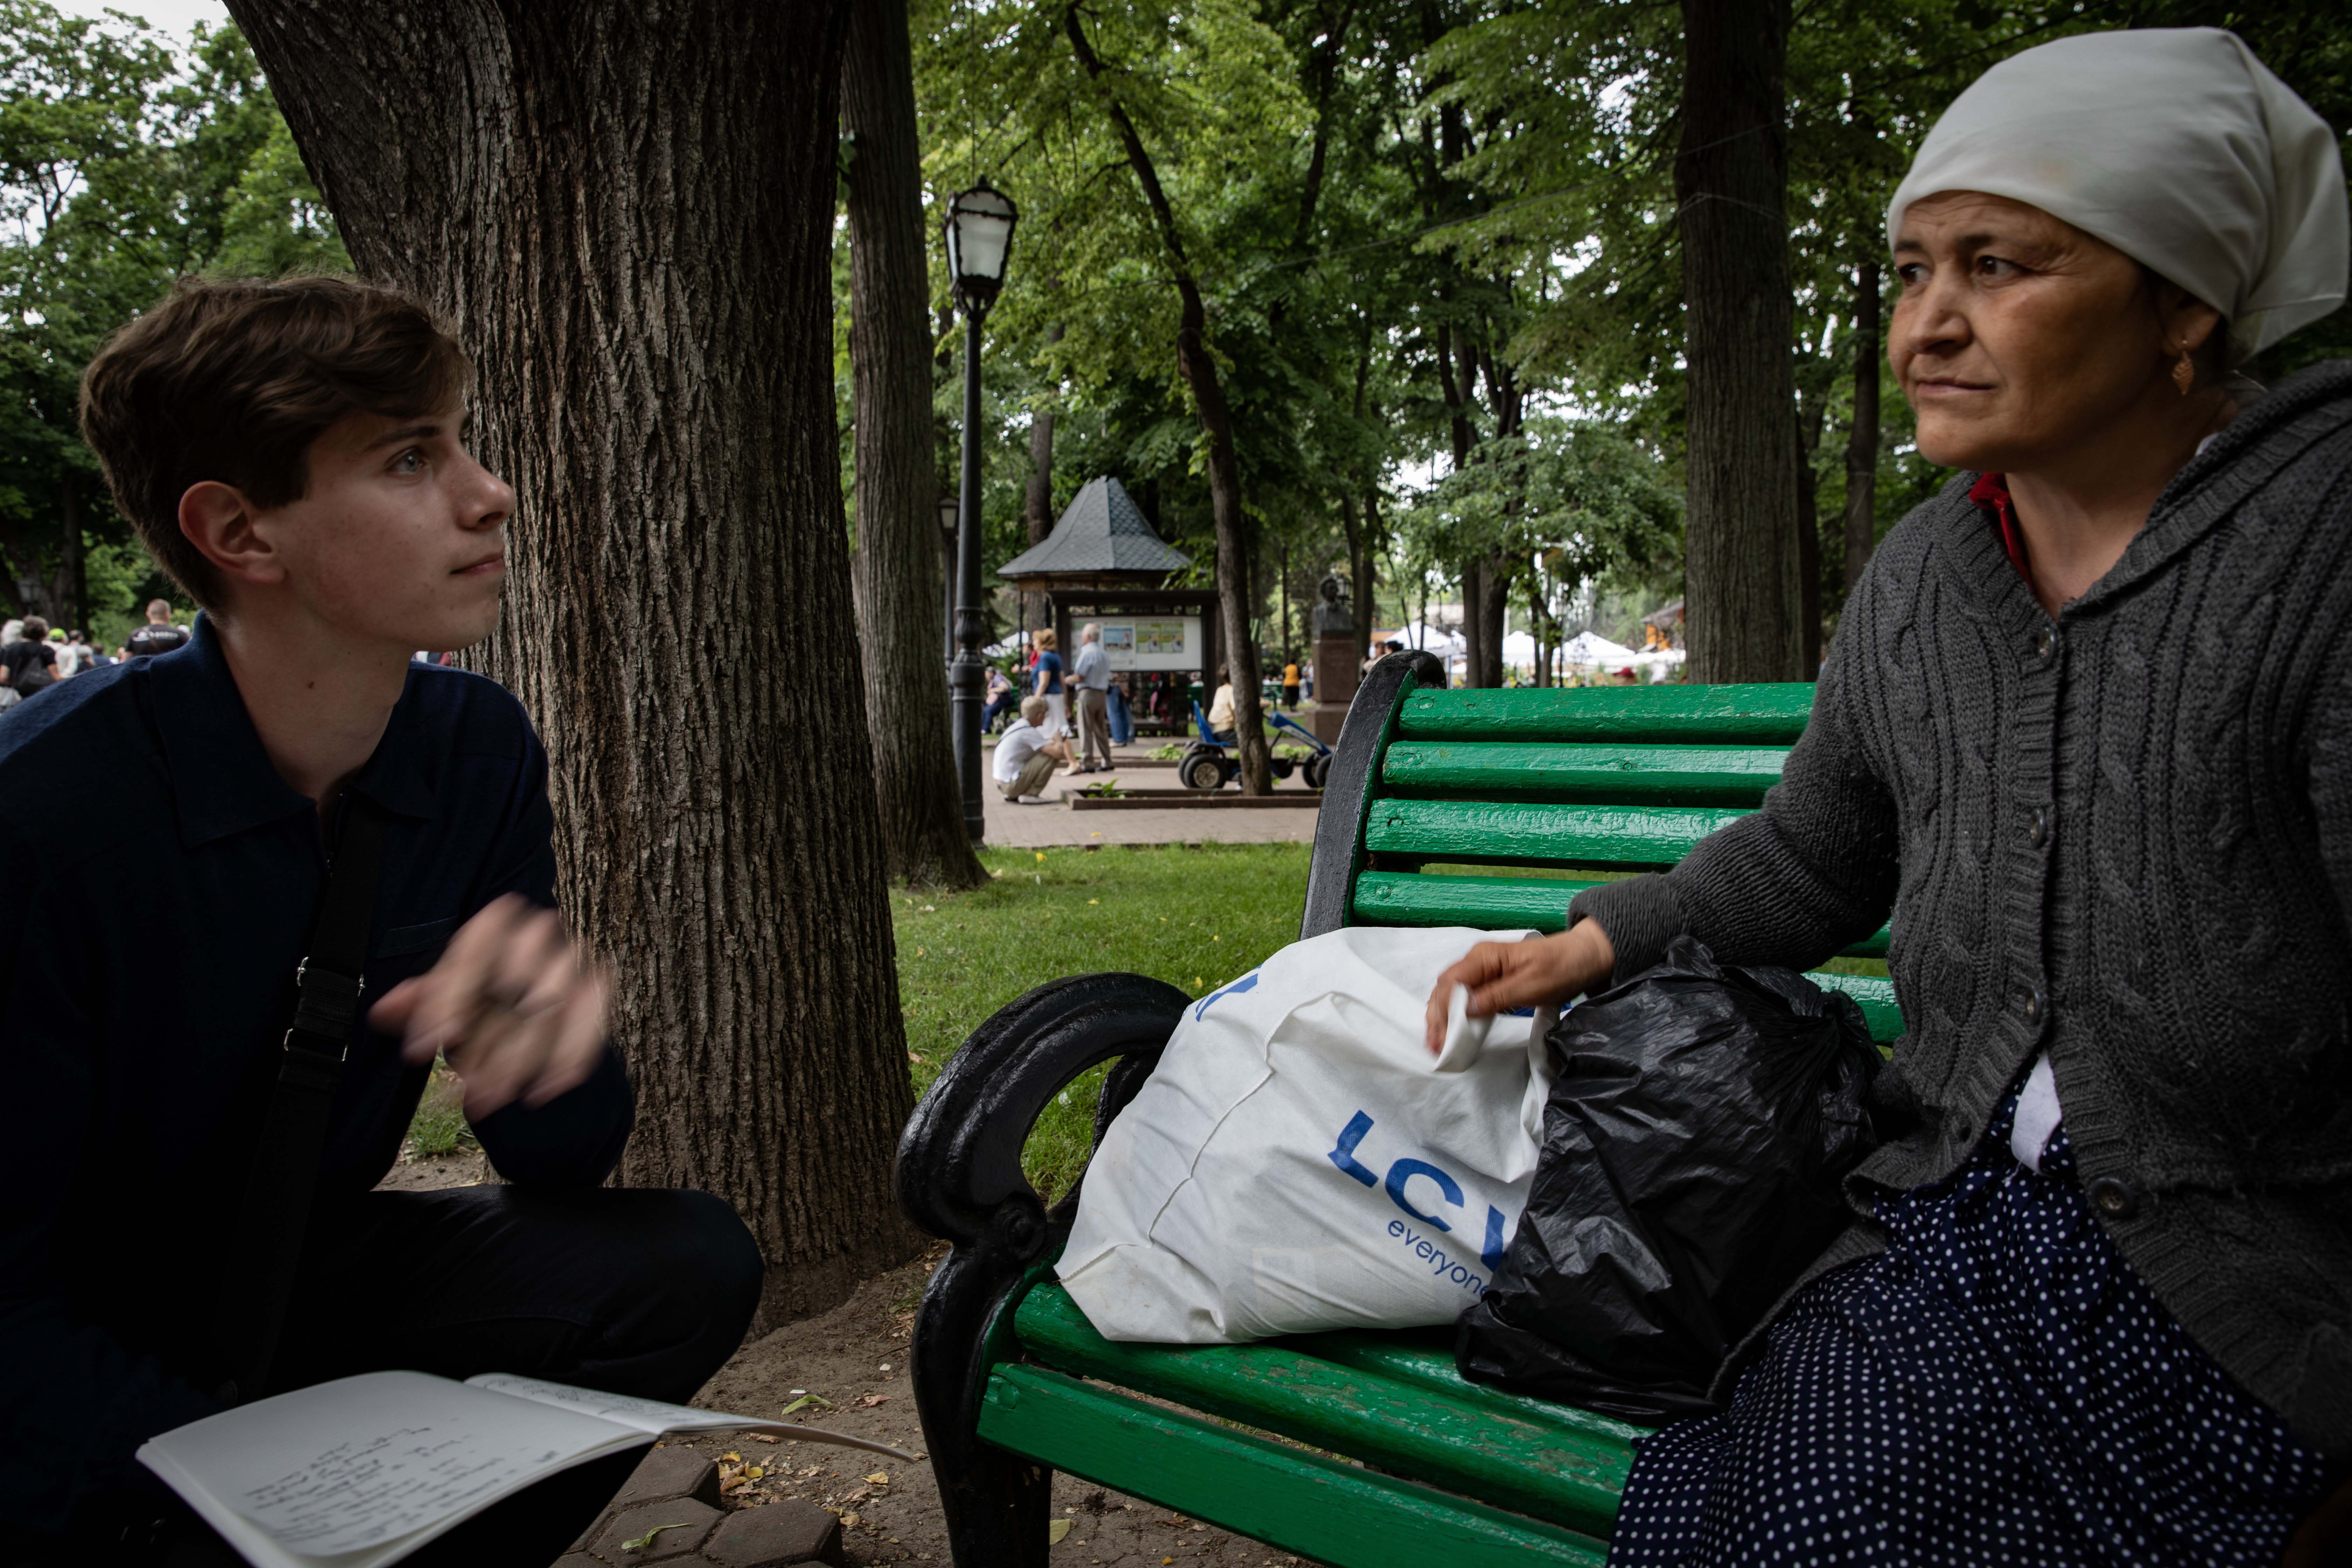 student interviews an elderly woman on a park bench in Moldova